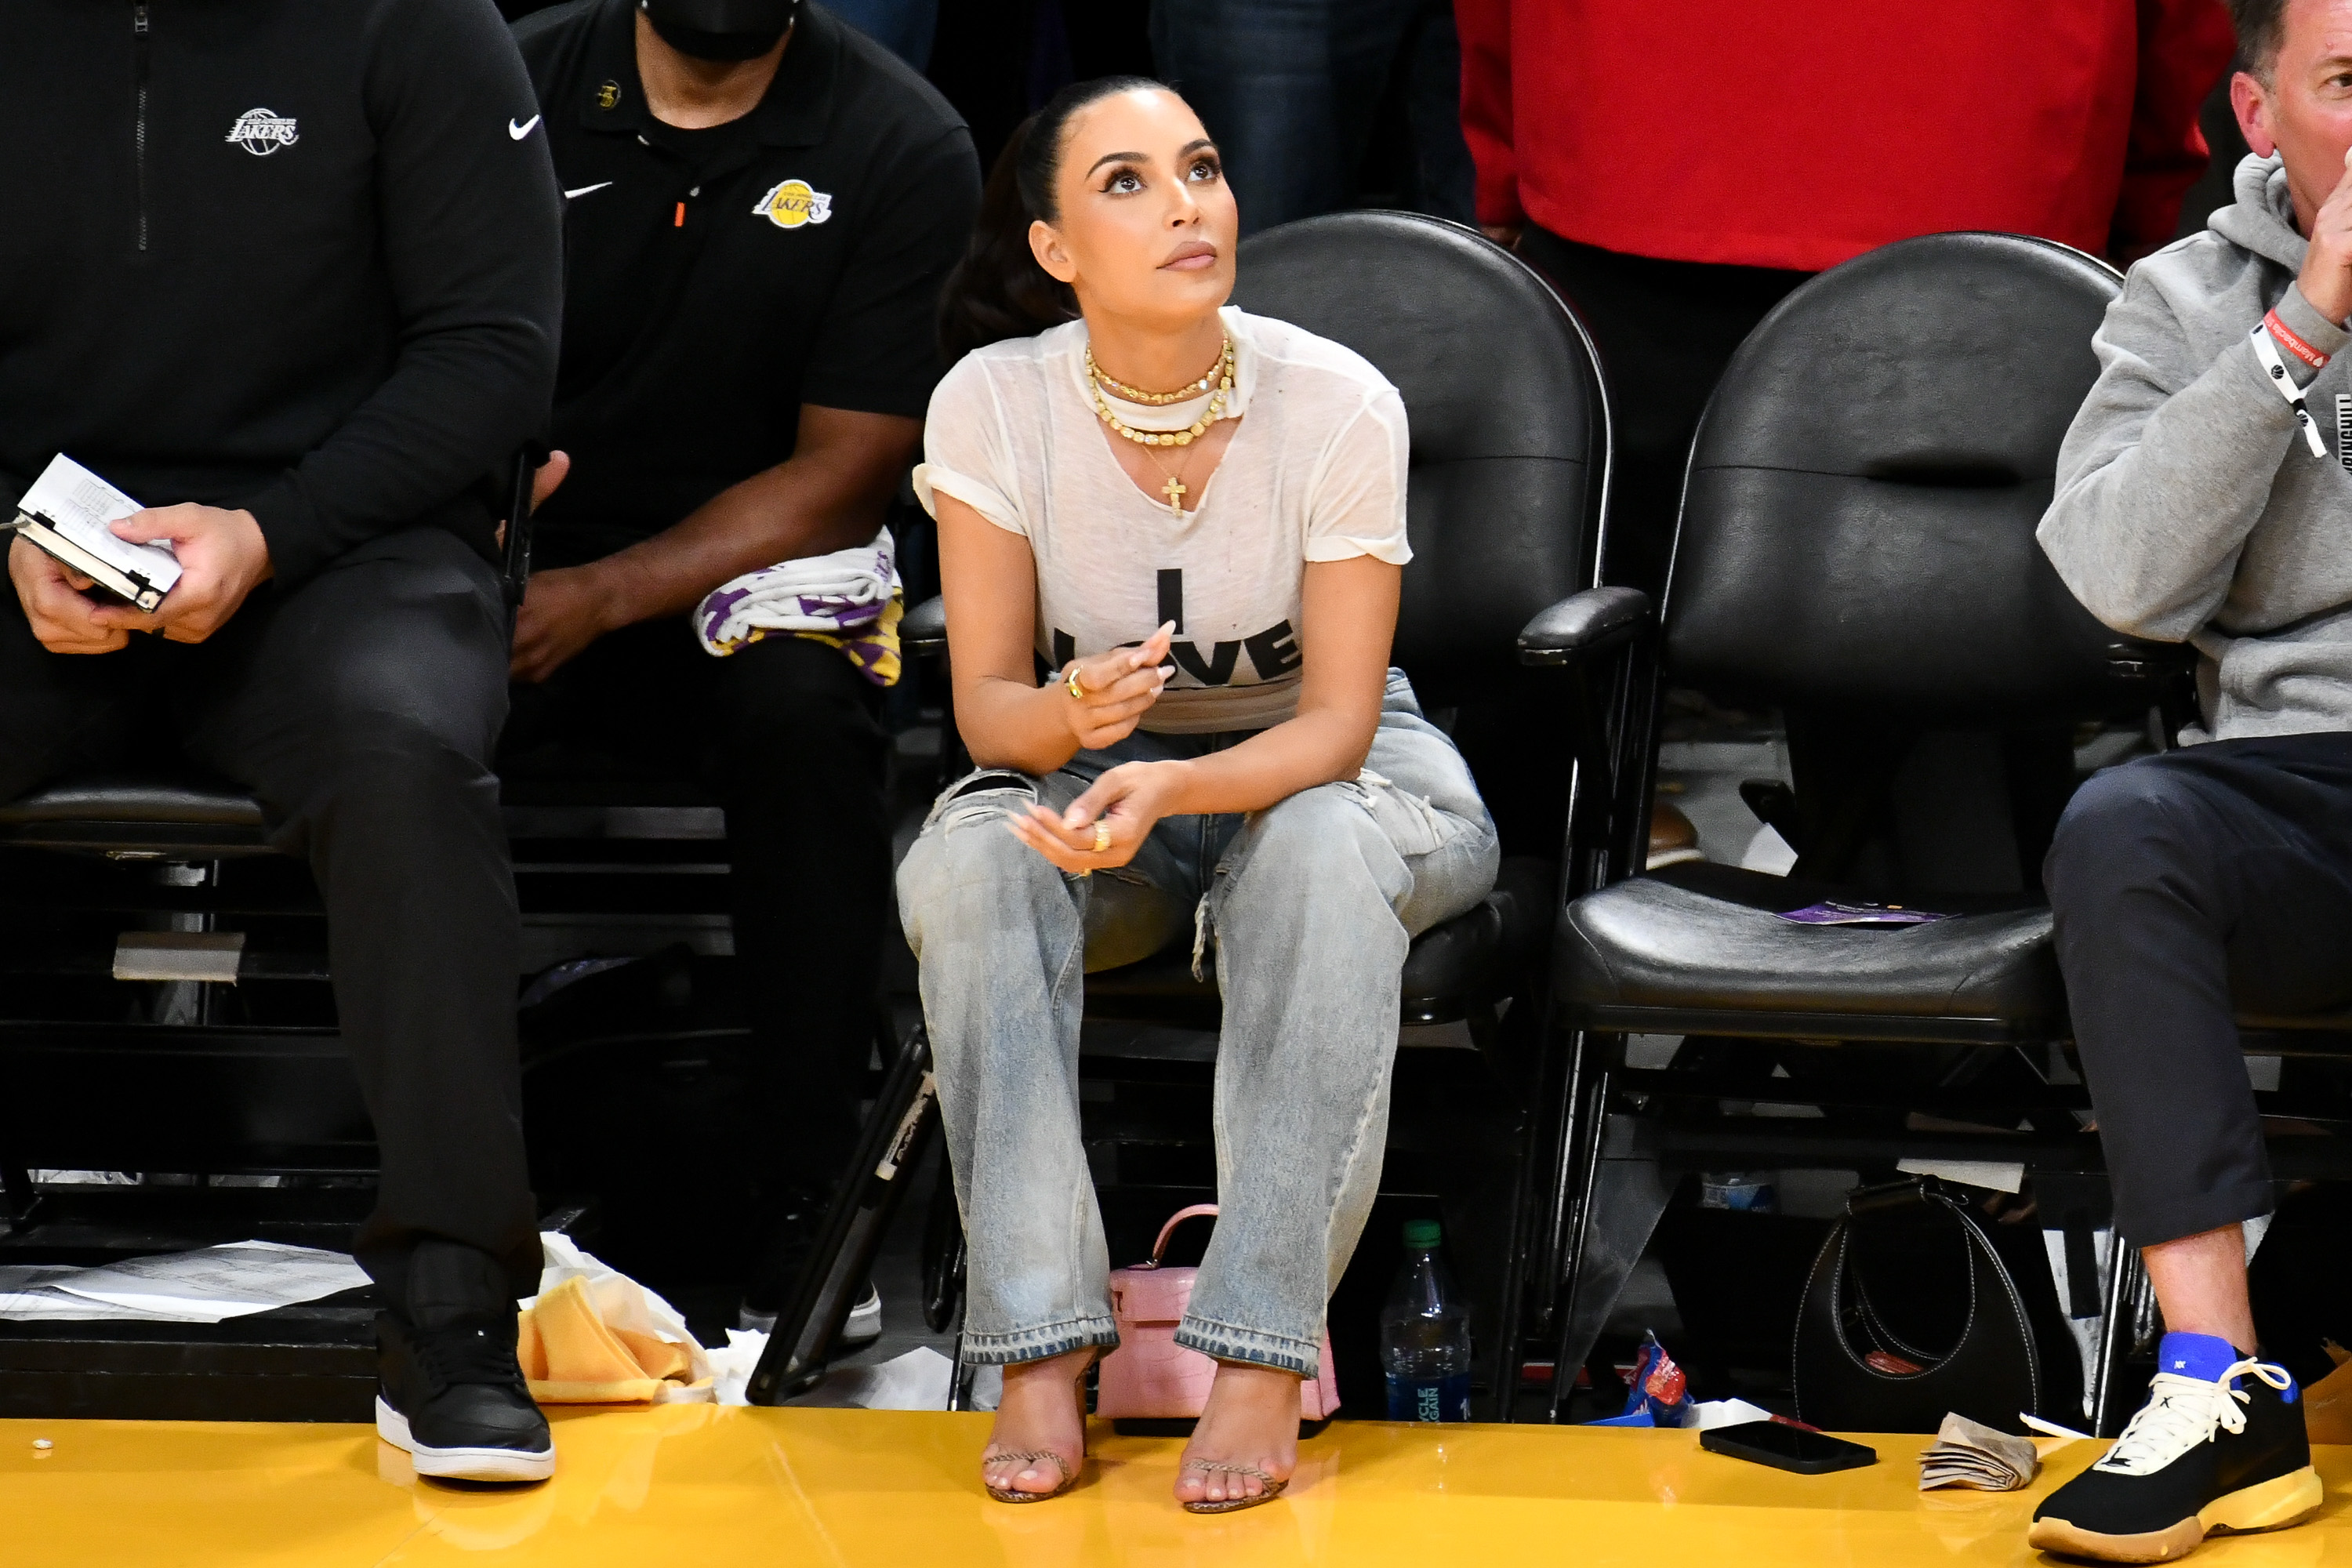 Kim Kardashian “Absolutely Not” Dating Any Lakers Players: Report